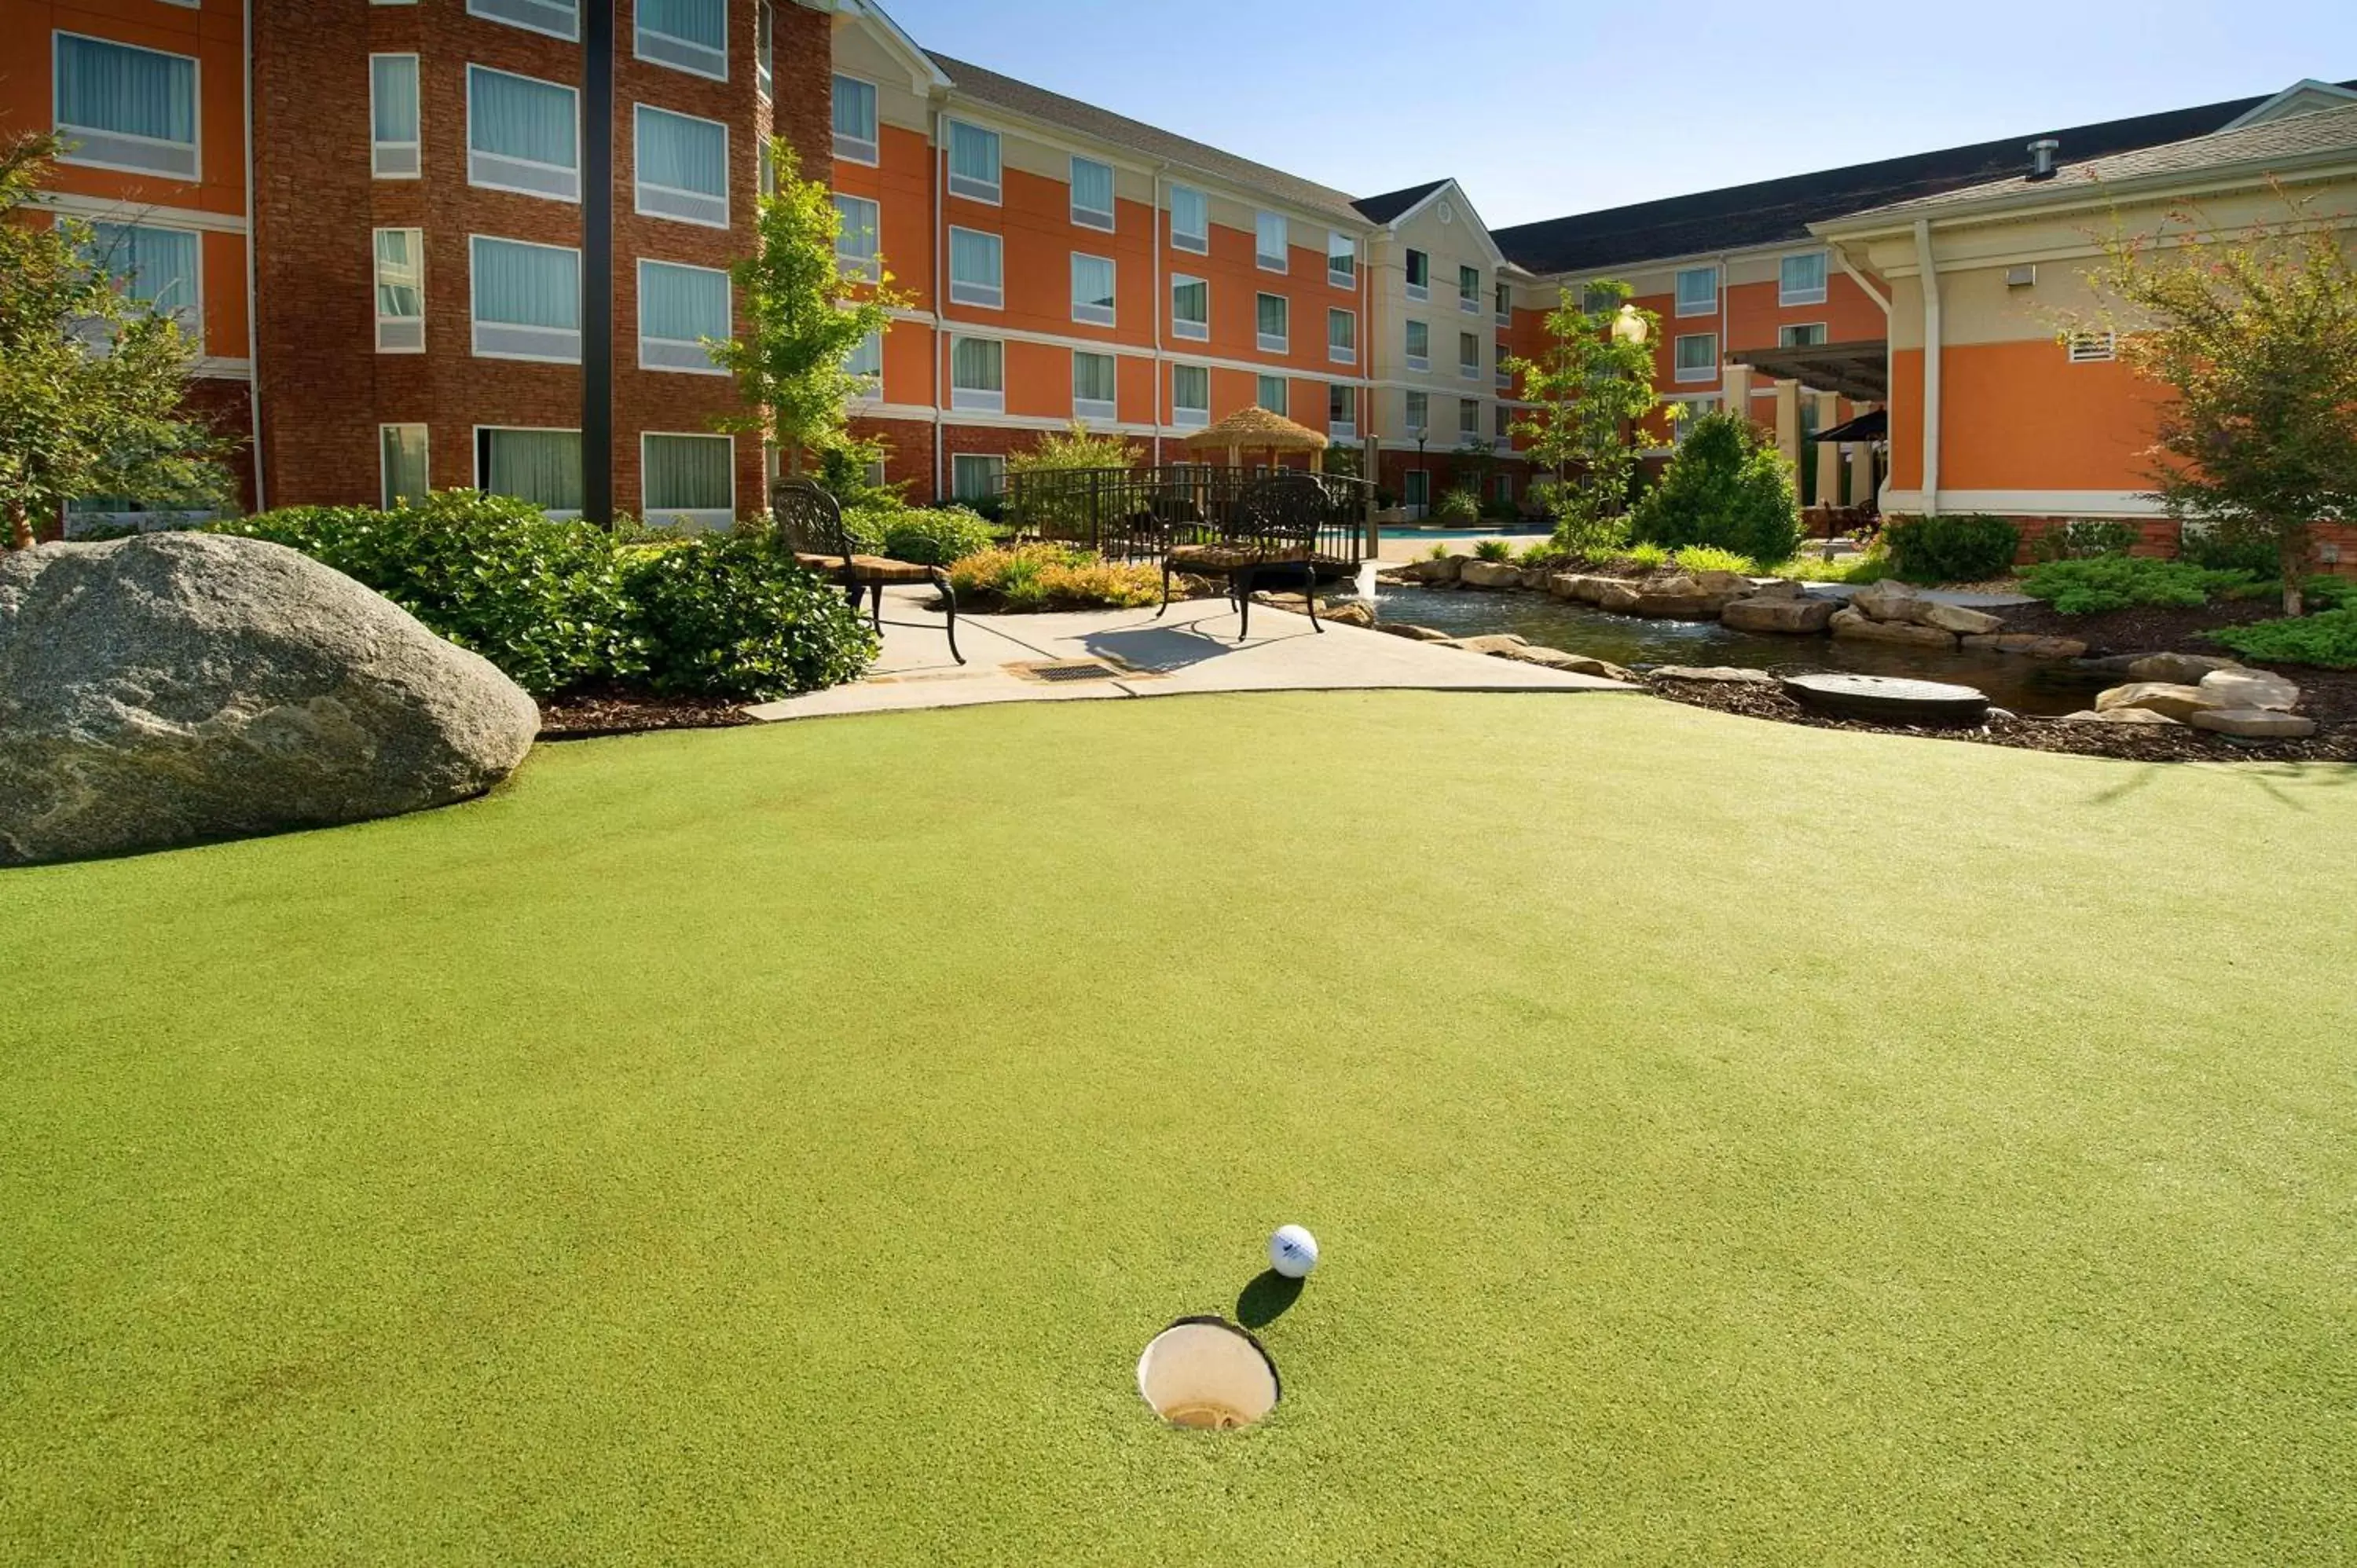 Golfcourse, Property Building in Homewood Suites by Hilton Atlanta NW/Kennesaw-Town Center